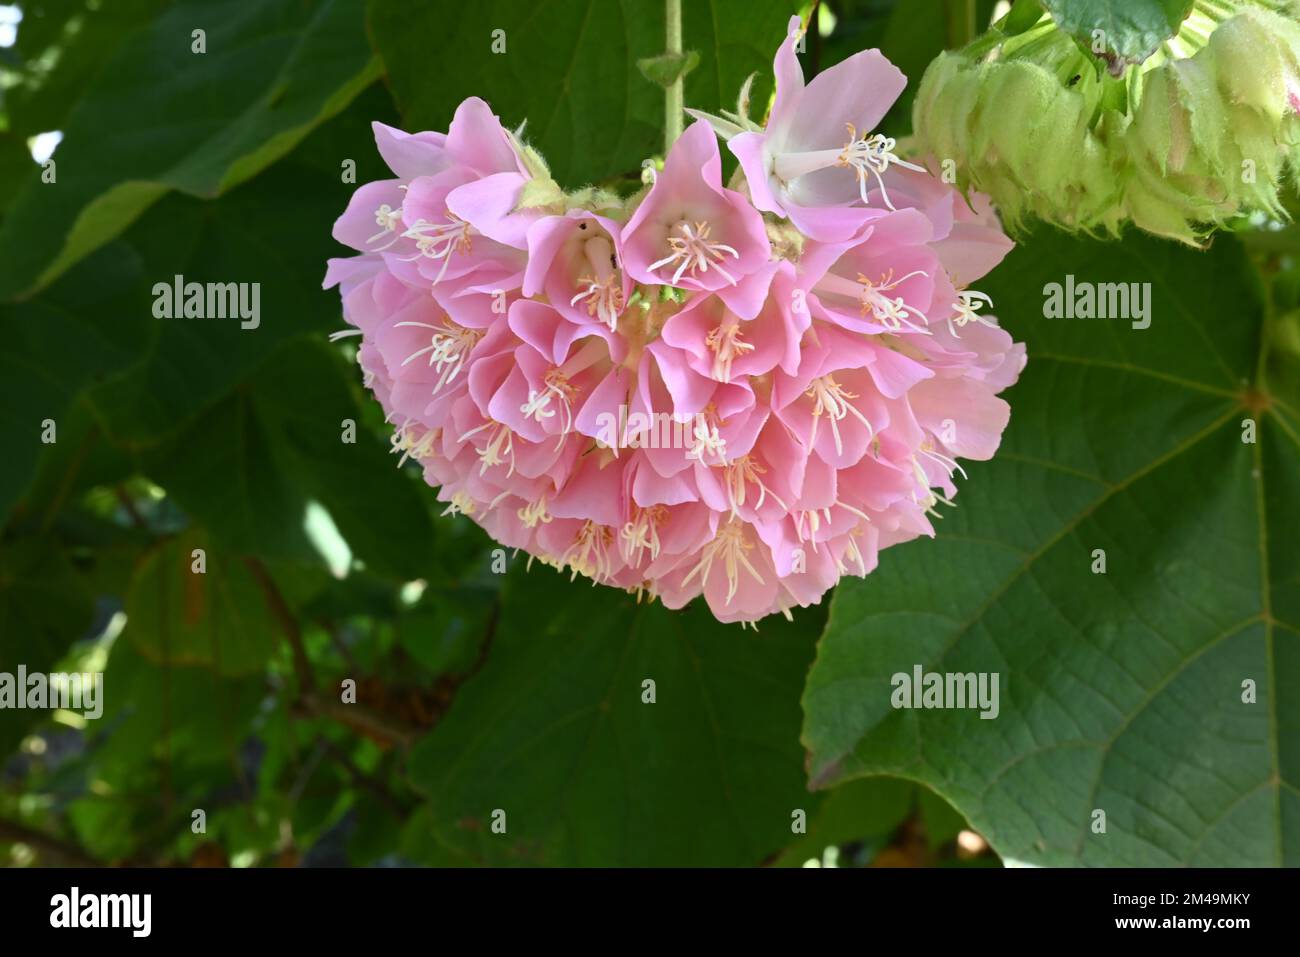 Light pink Dombeya flowers blooming in closeup Stock Photo